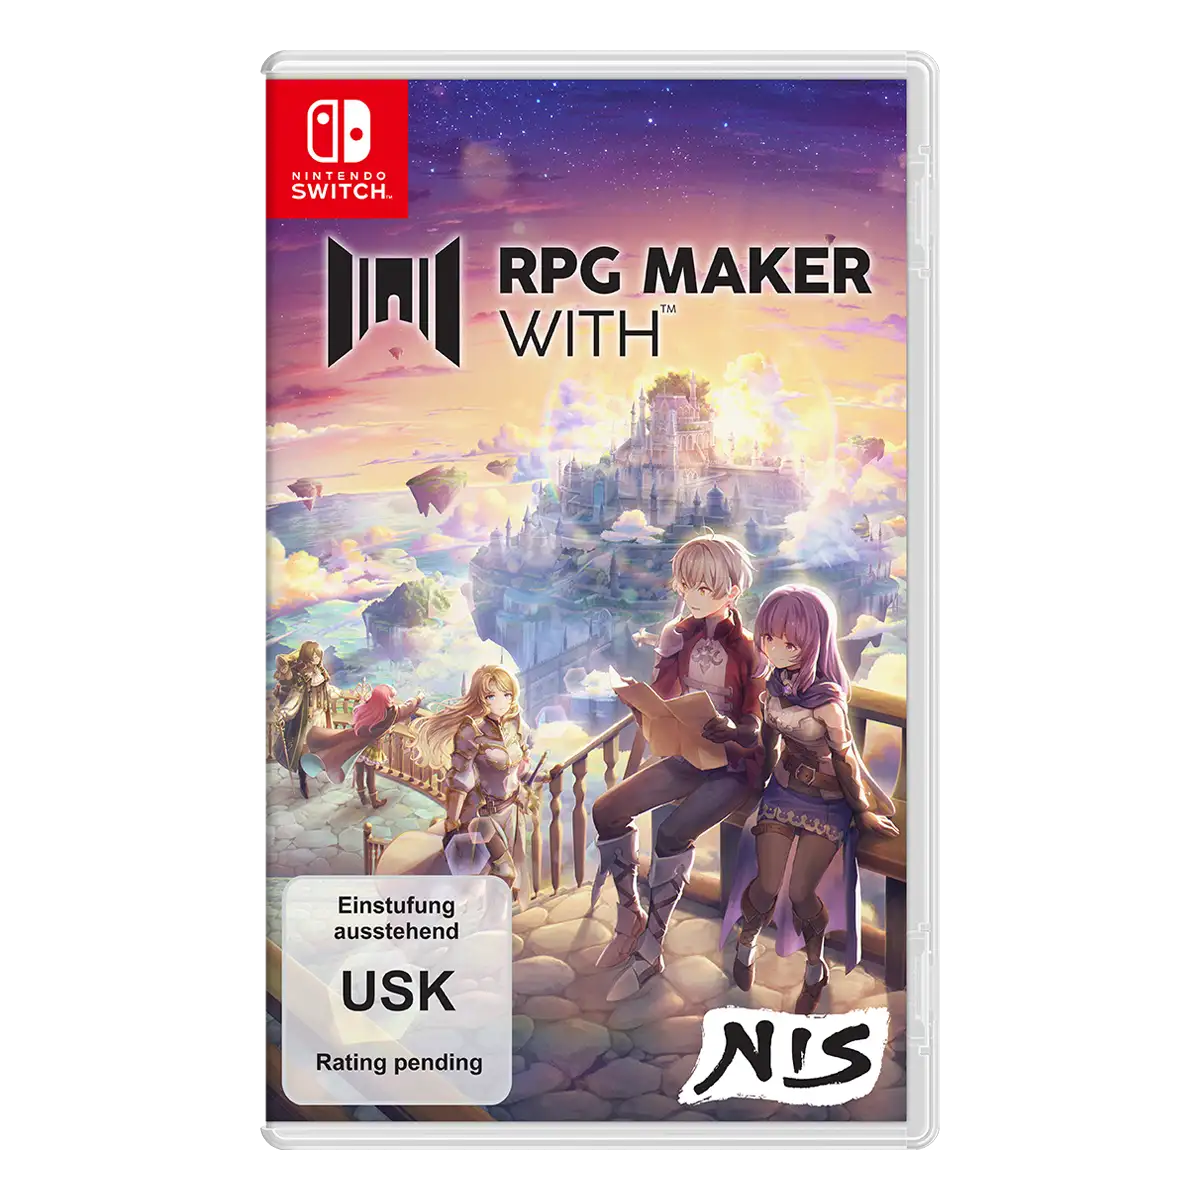 RPG MAKER WITH (Switch) | Game Legends